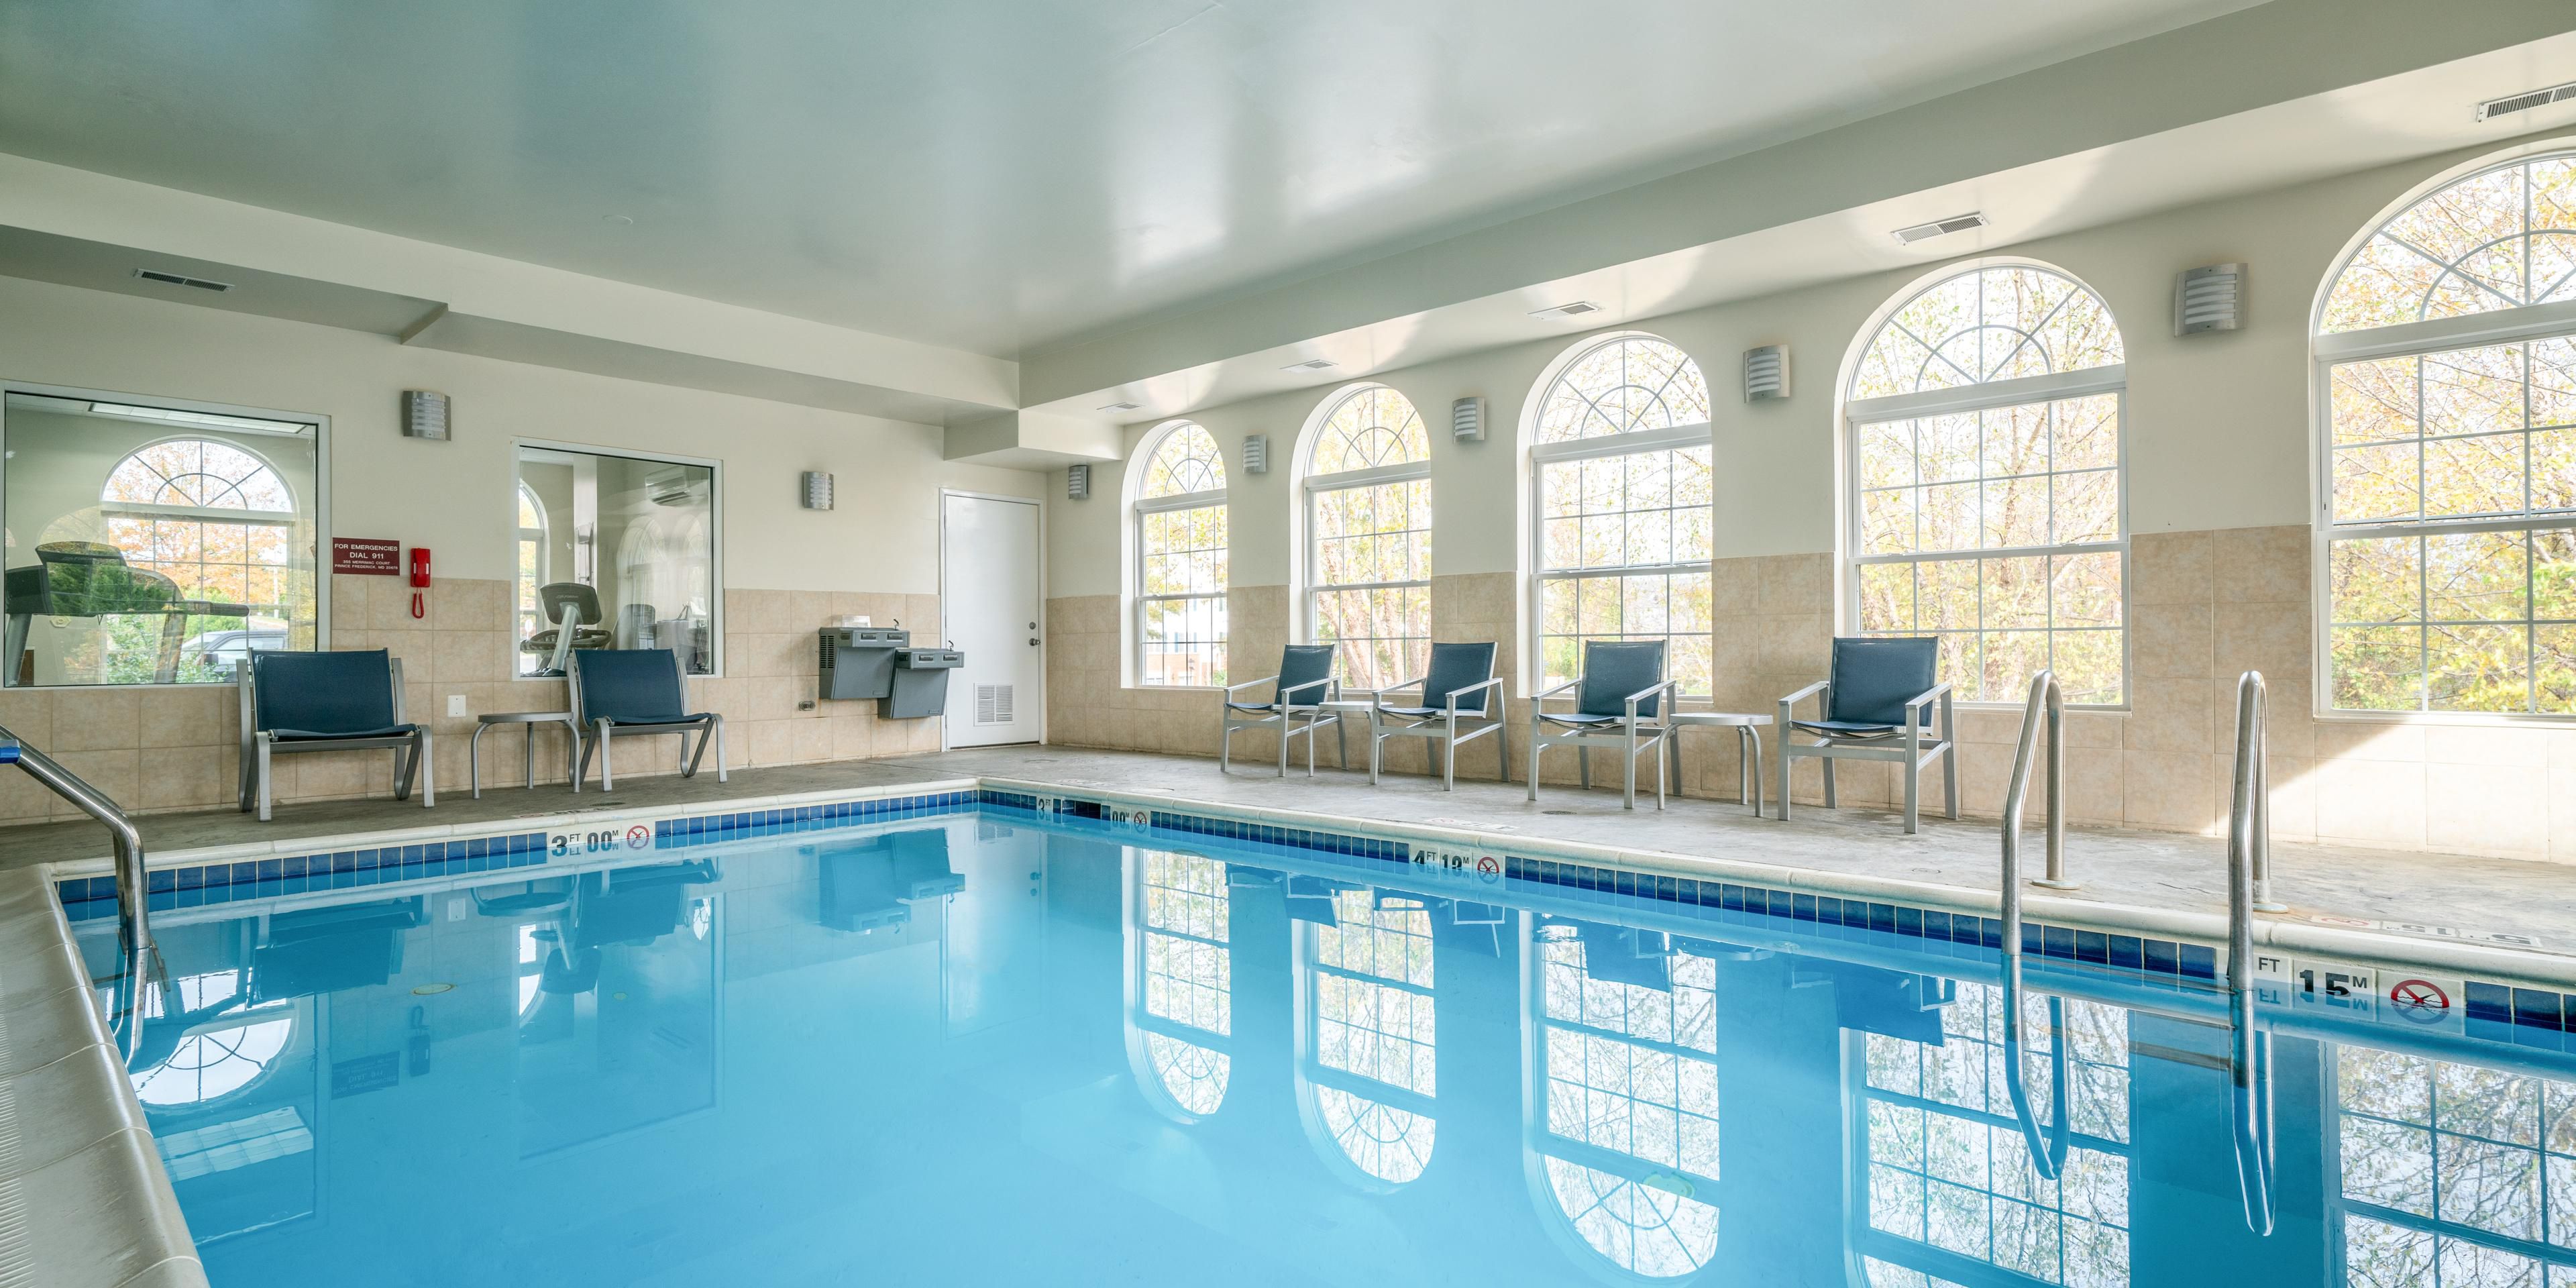 Relax by taking a refreshing dip in our all year-round heated indoor pool, open daily. Bring the kids to play and have fun in the pool, however, kids must be accompanied by adults.